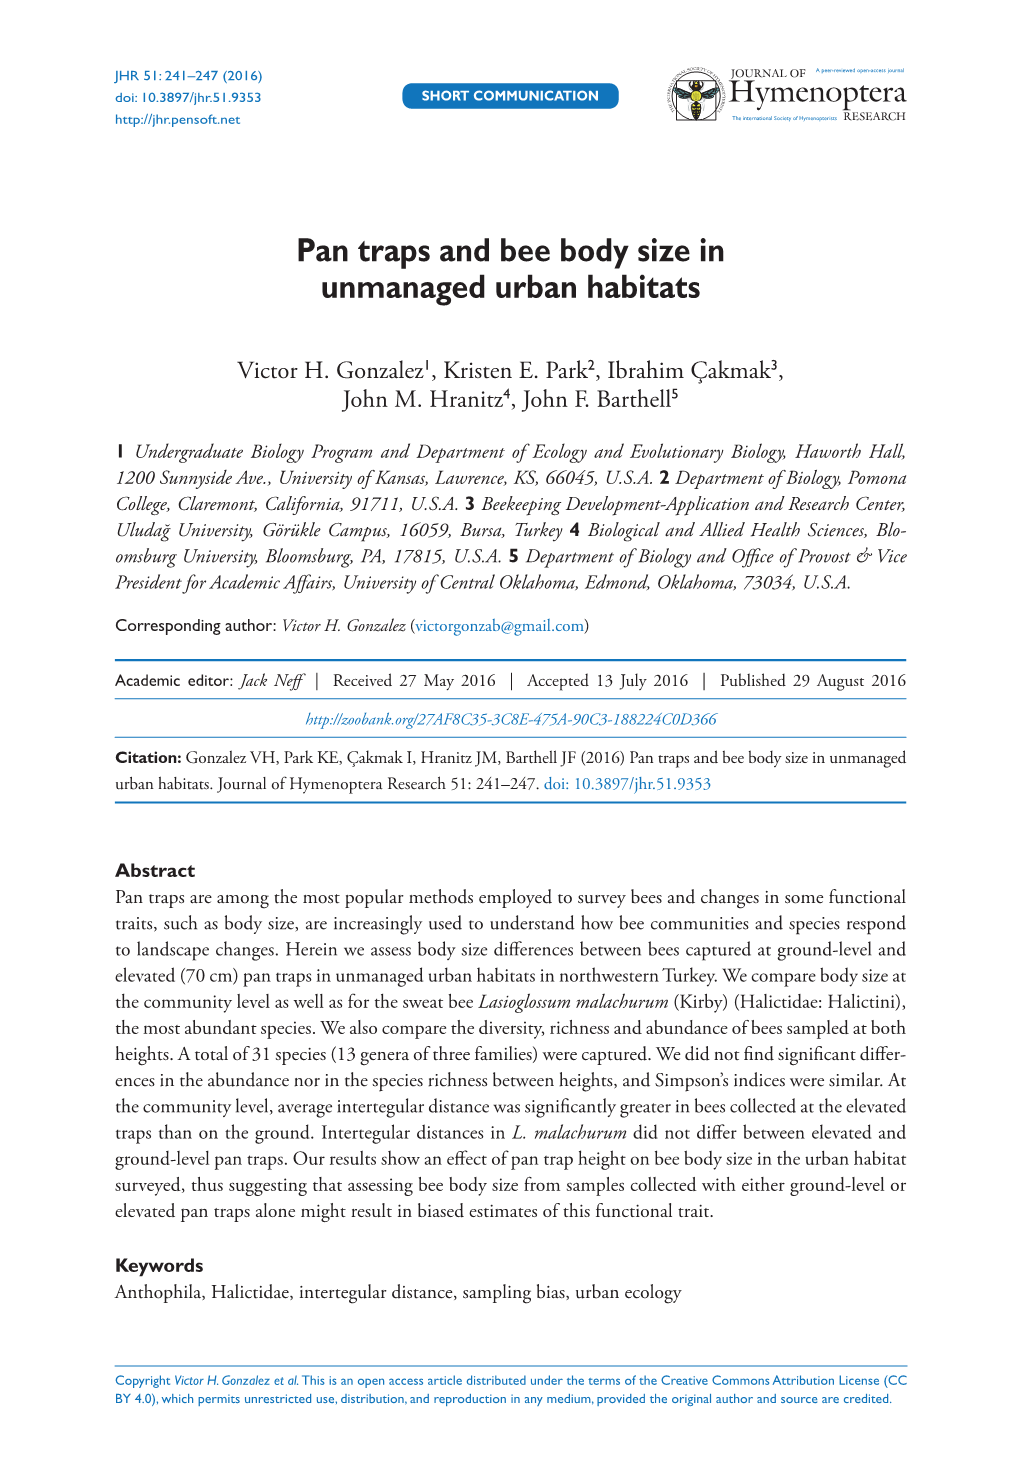 ﻿Pan Traps and Bee Body Size in Unmanaged Urban Habitats